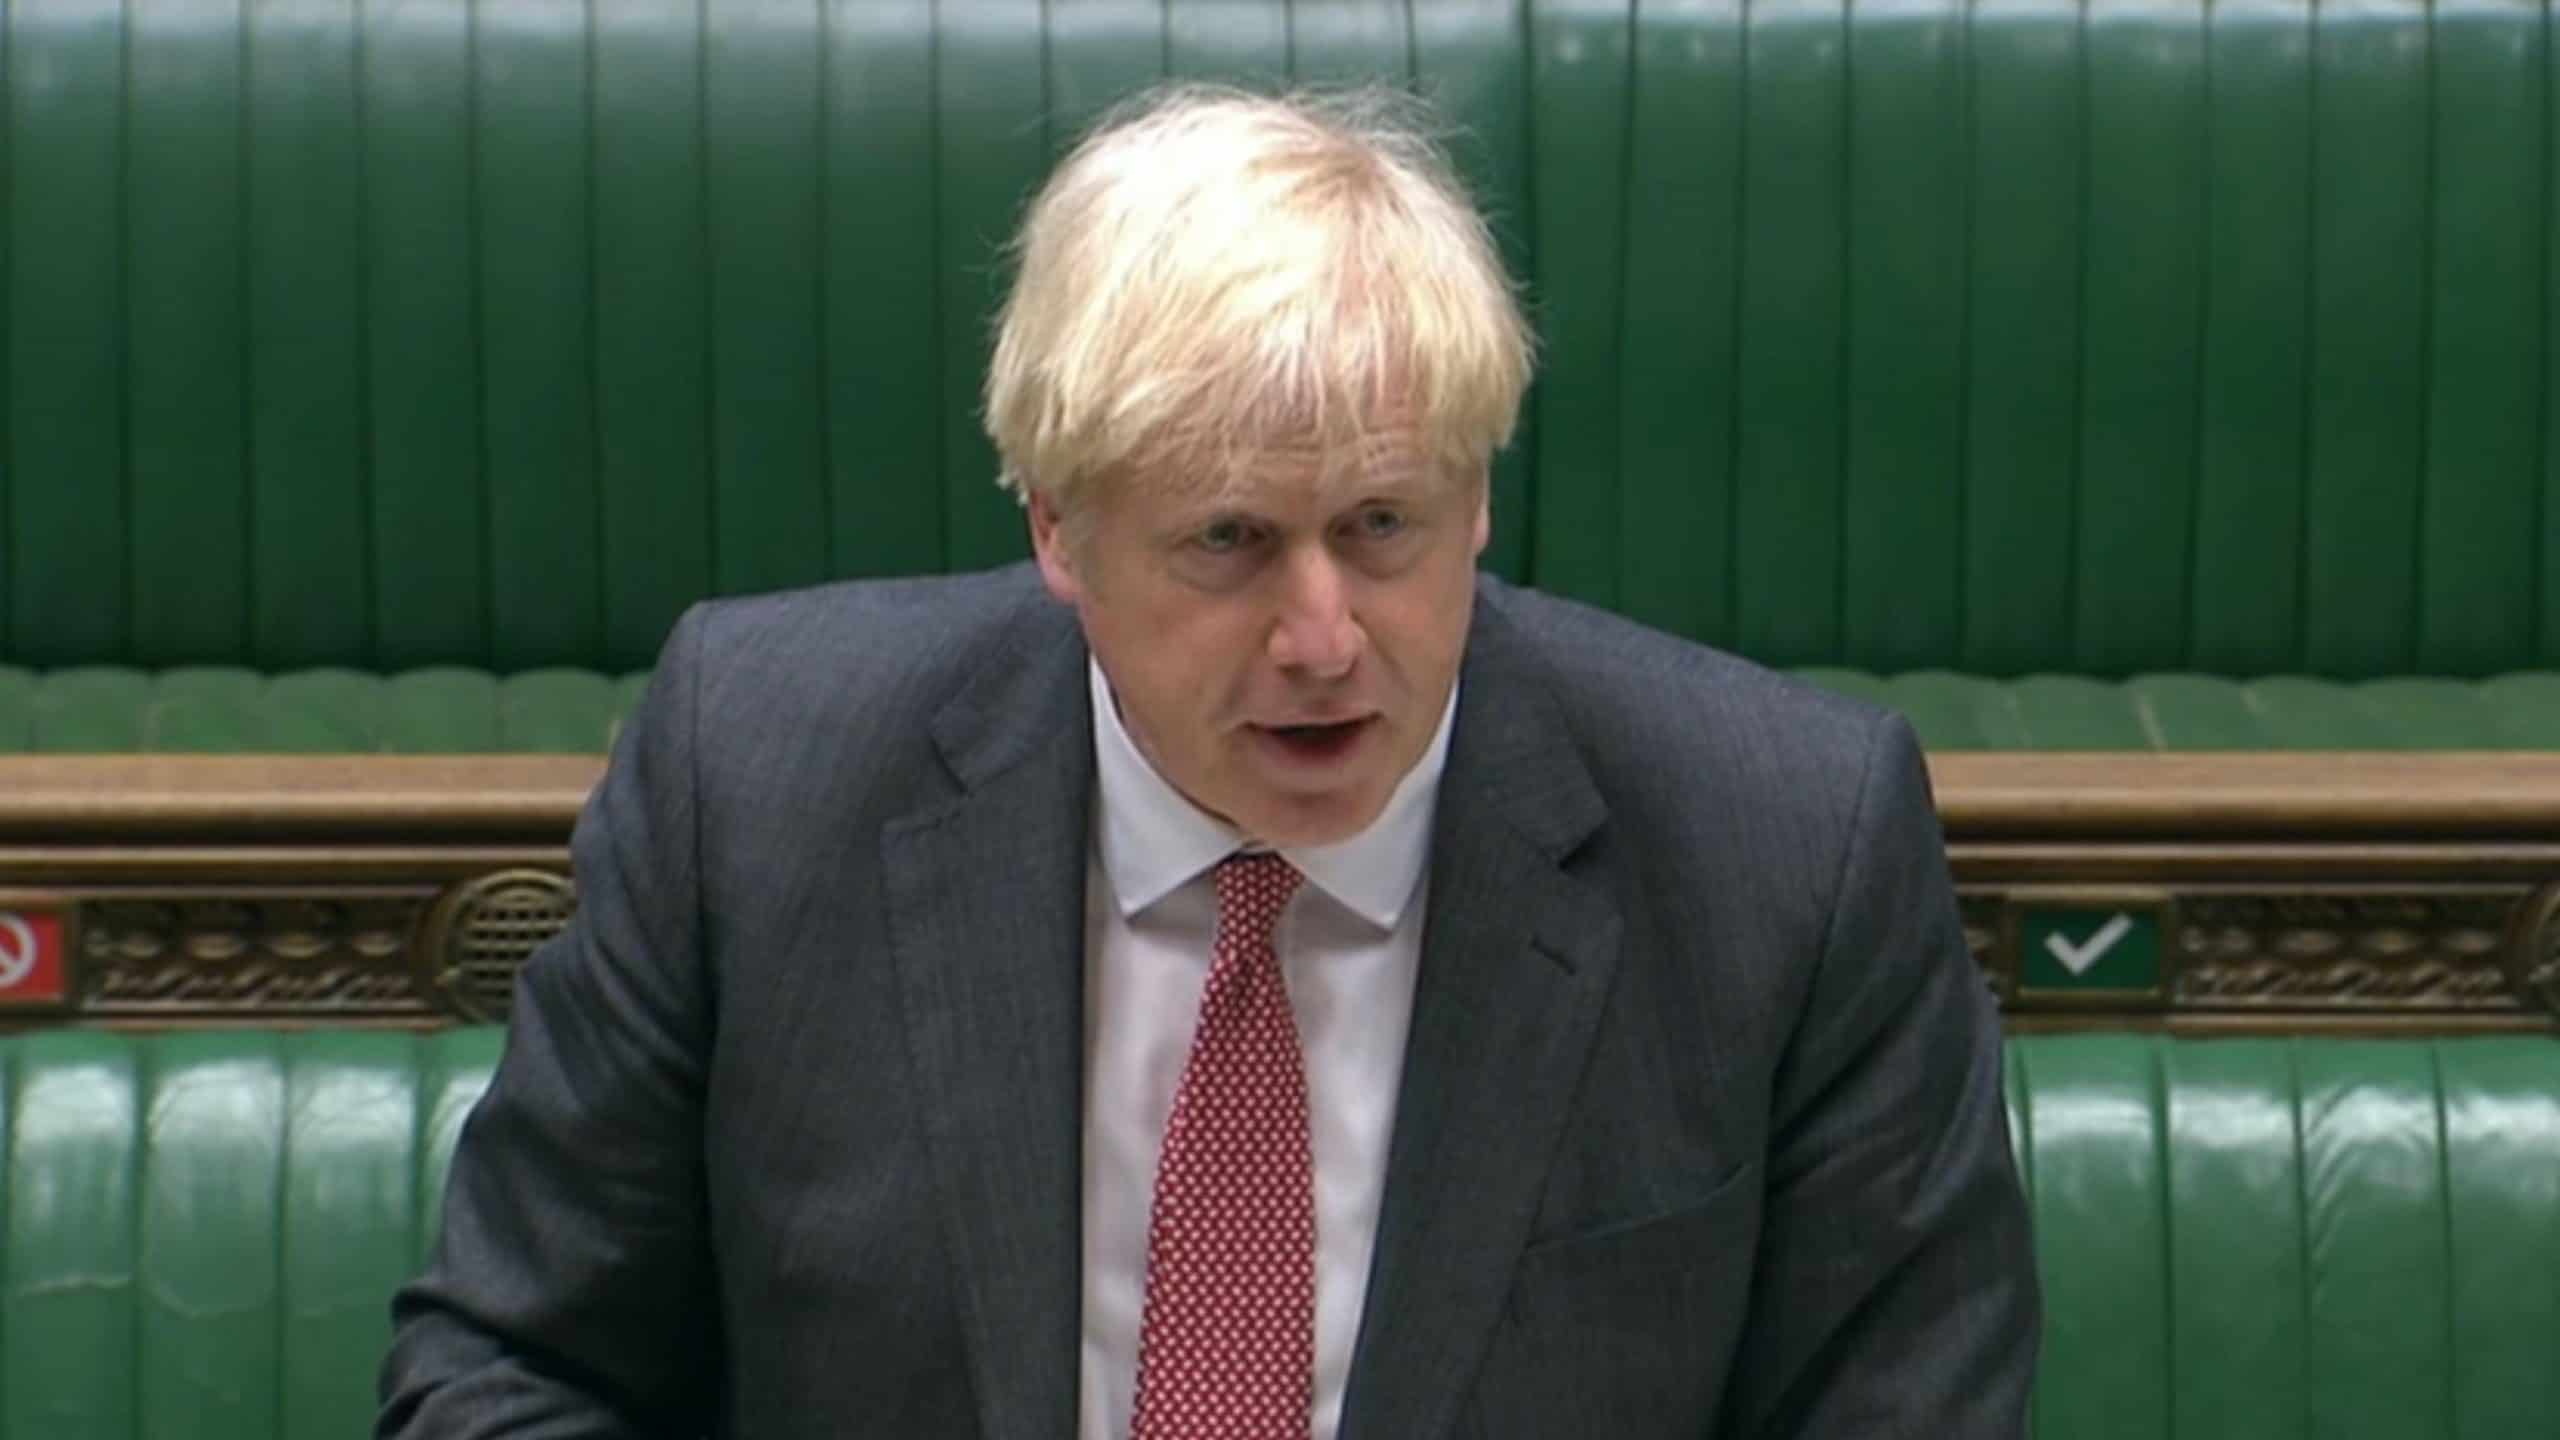 Revealed: The full list of MPs who helped Johnson’s Brexit bill clear the Commons